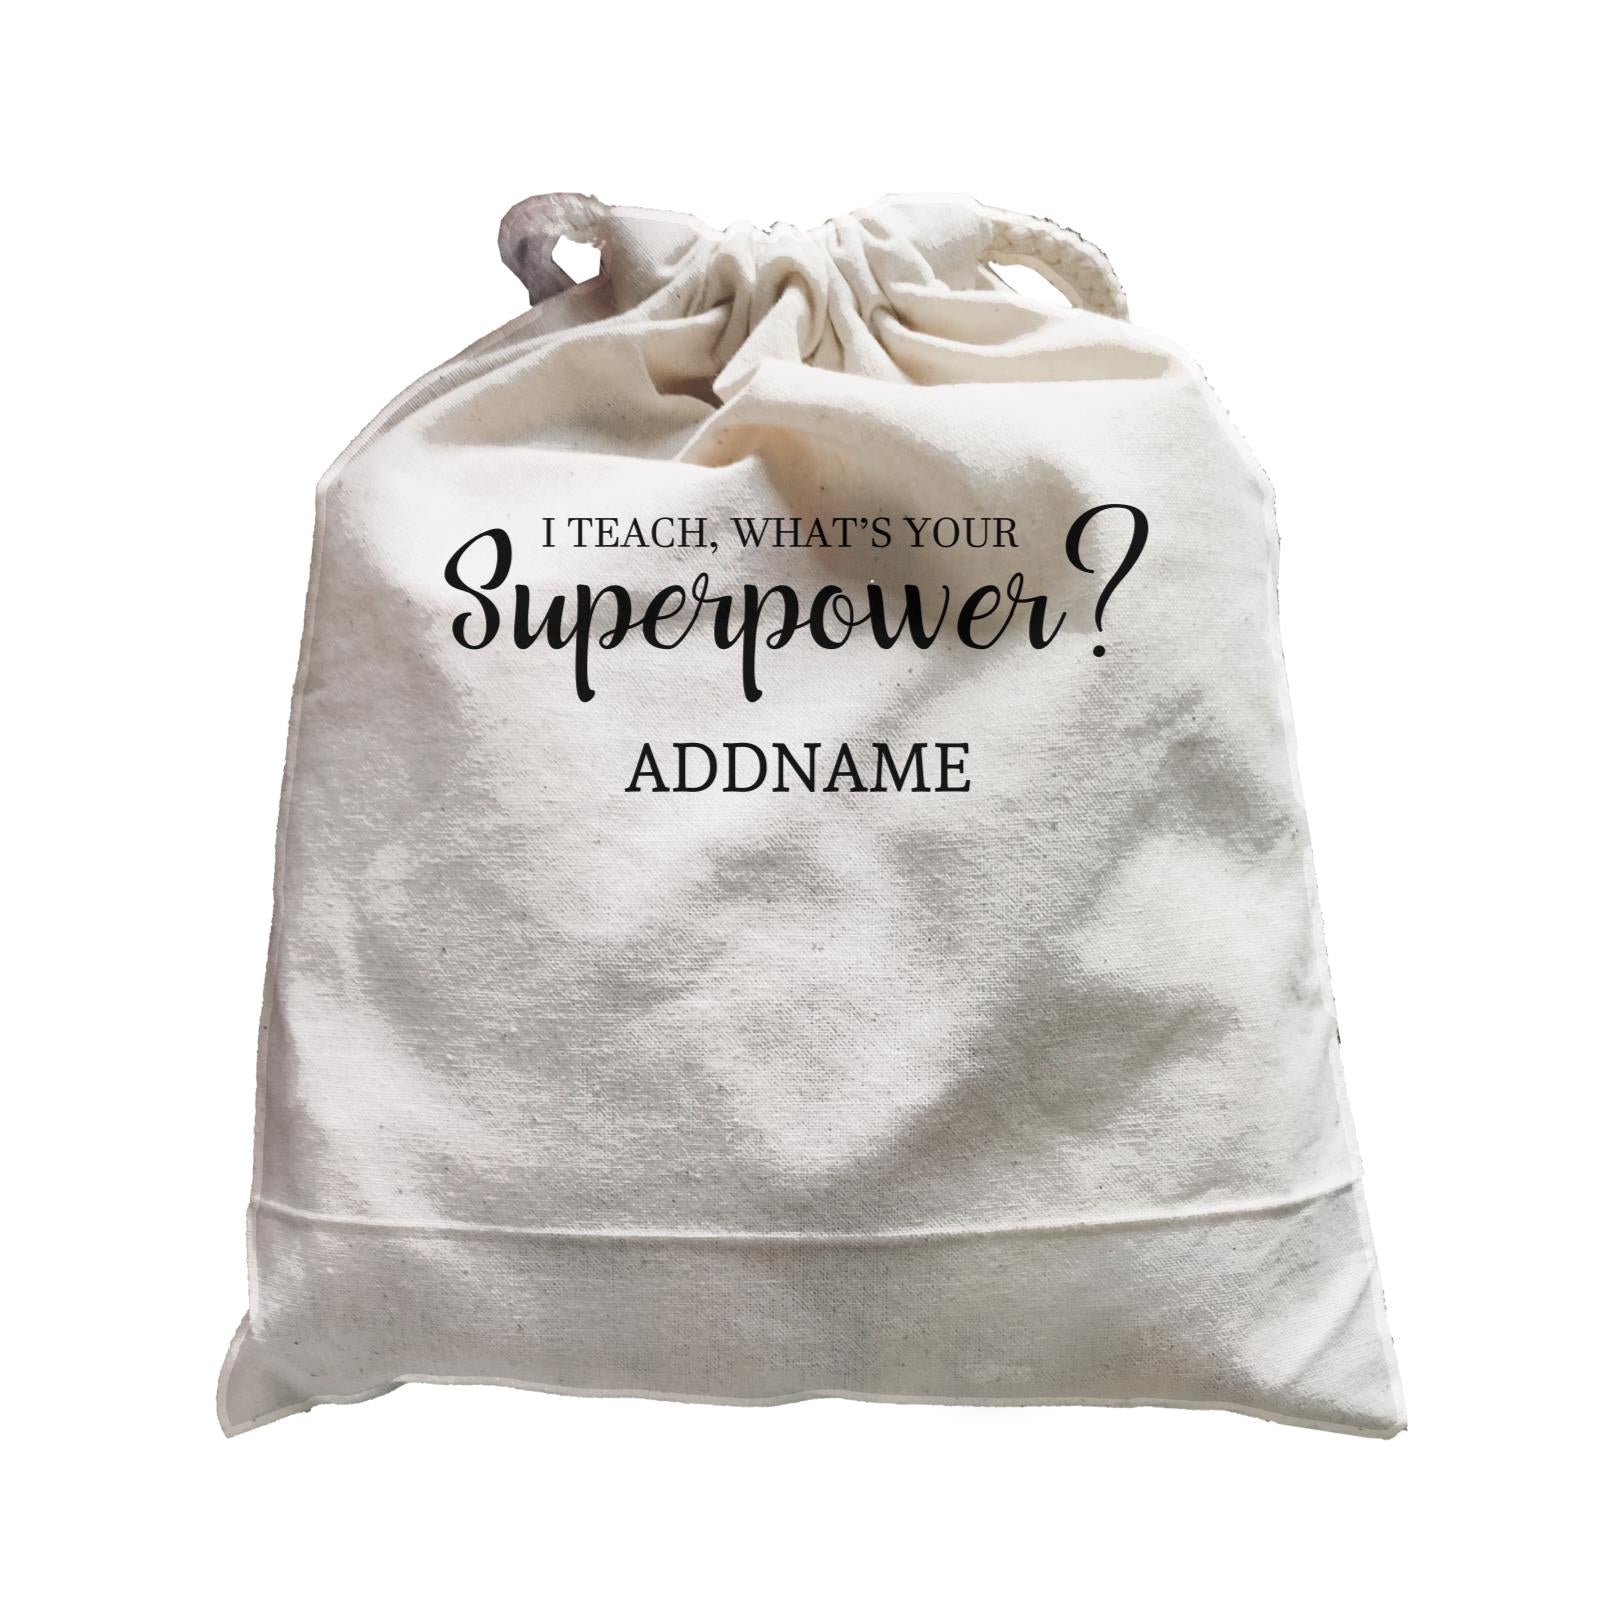 Super Teachers I Teach What's Your Superpower Addname Satchel